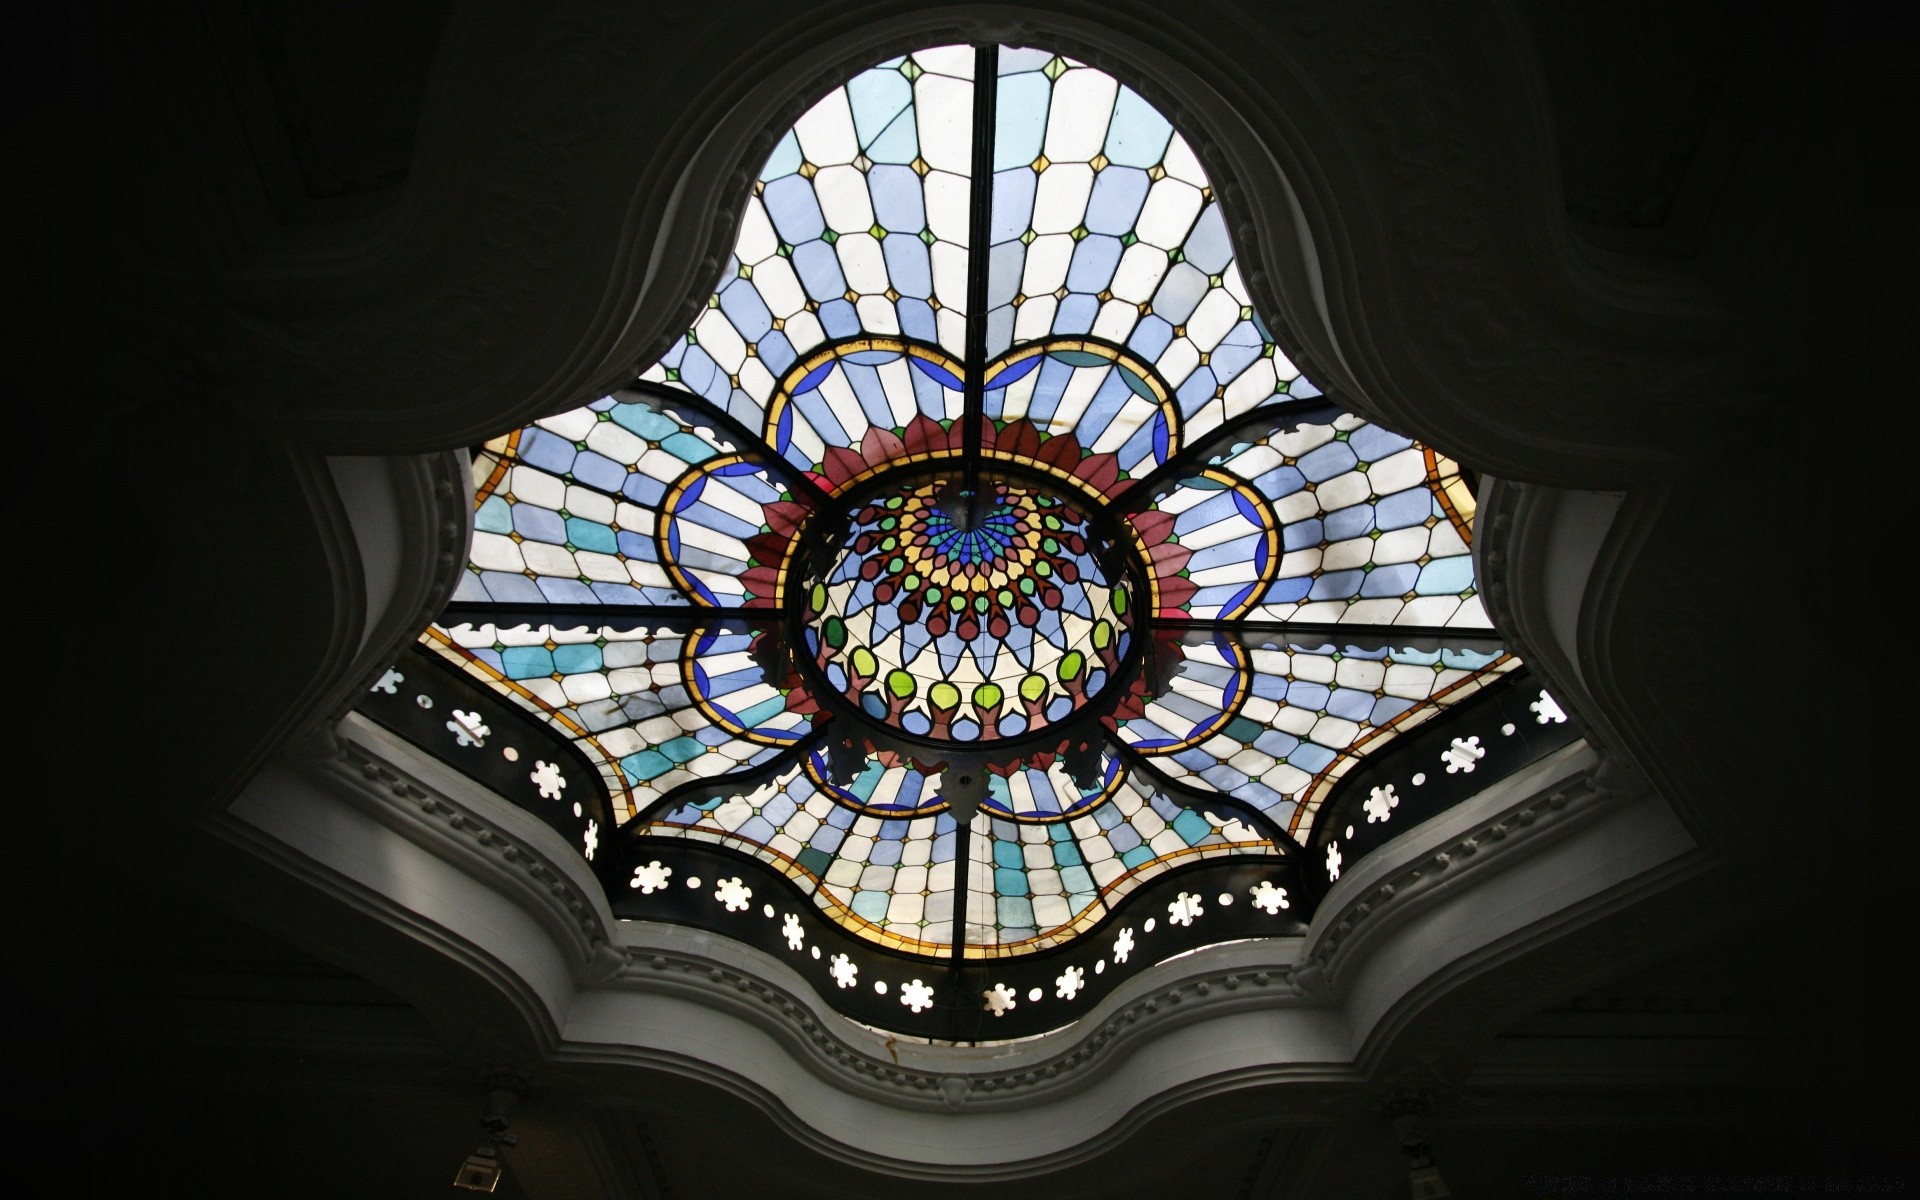 interior ceiling architecture inside indoors light church art glass travel building dome religion